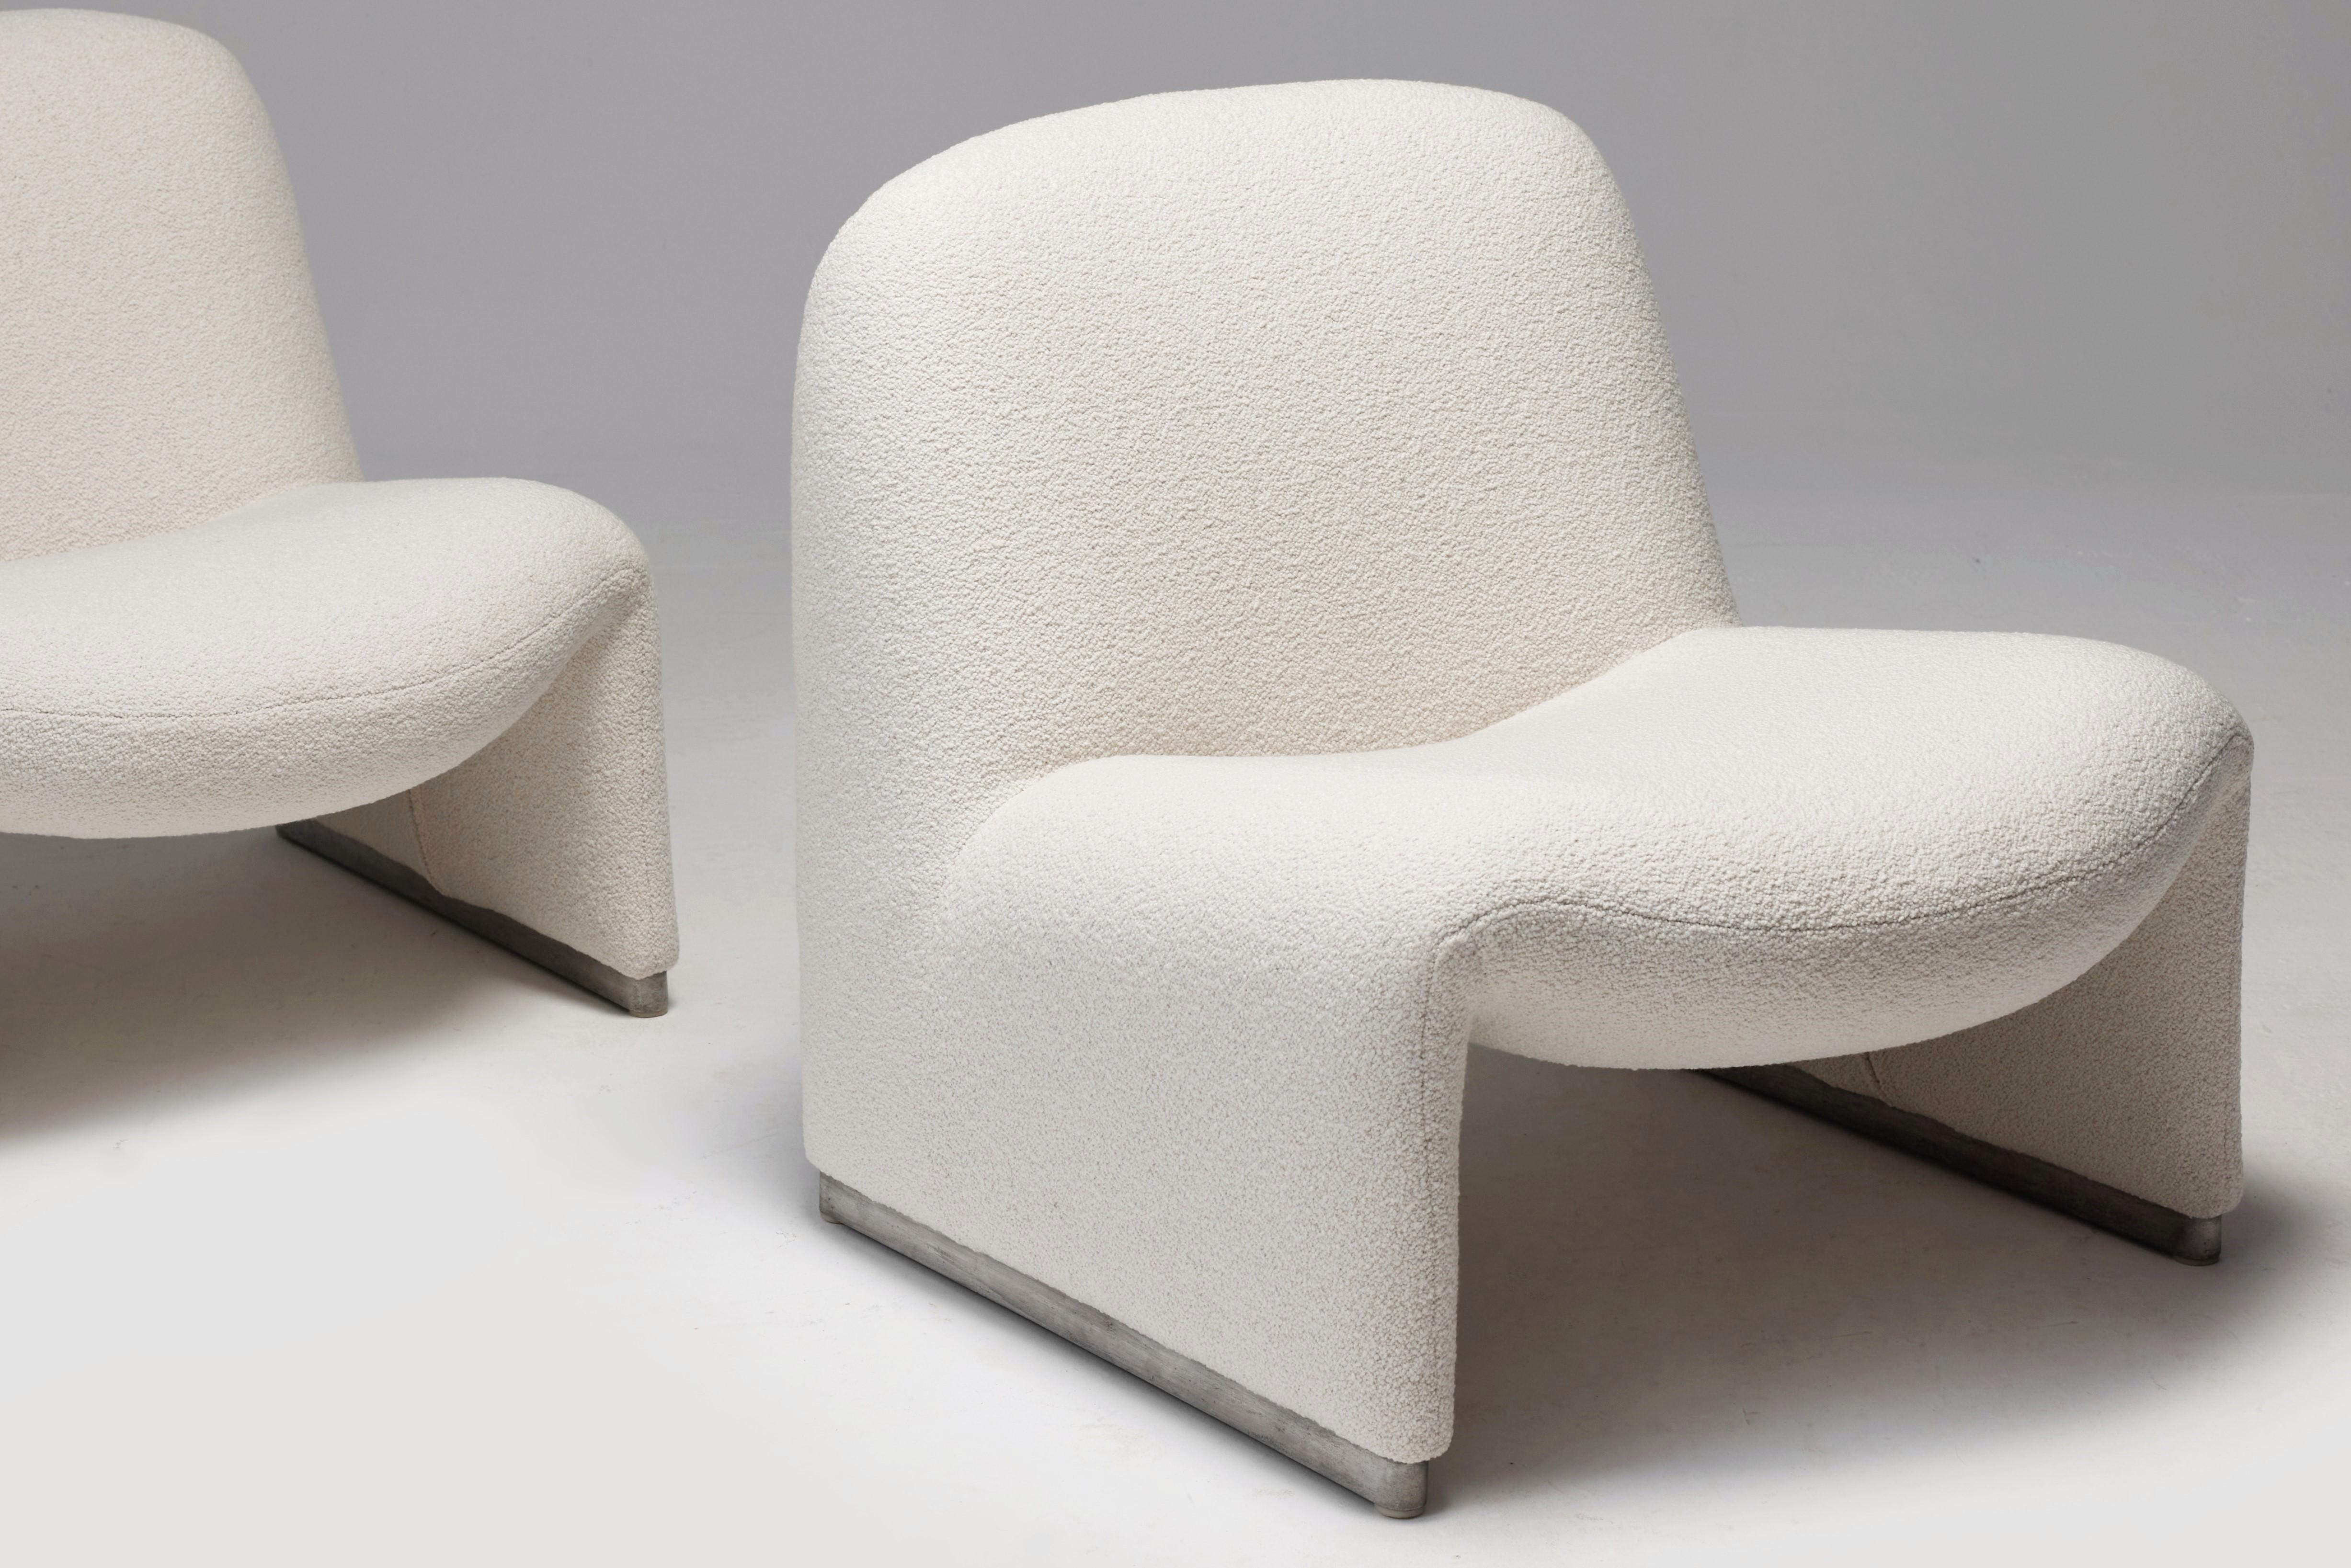 Late 20th Century Vintage Alky Chairs in Off-White Fabric by Giancarlo Piretti for Artifort, 1970s For Sale